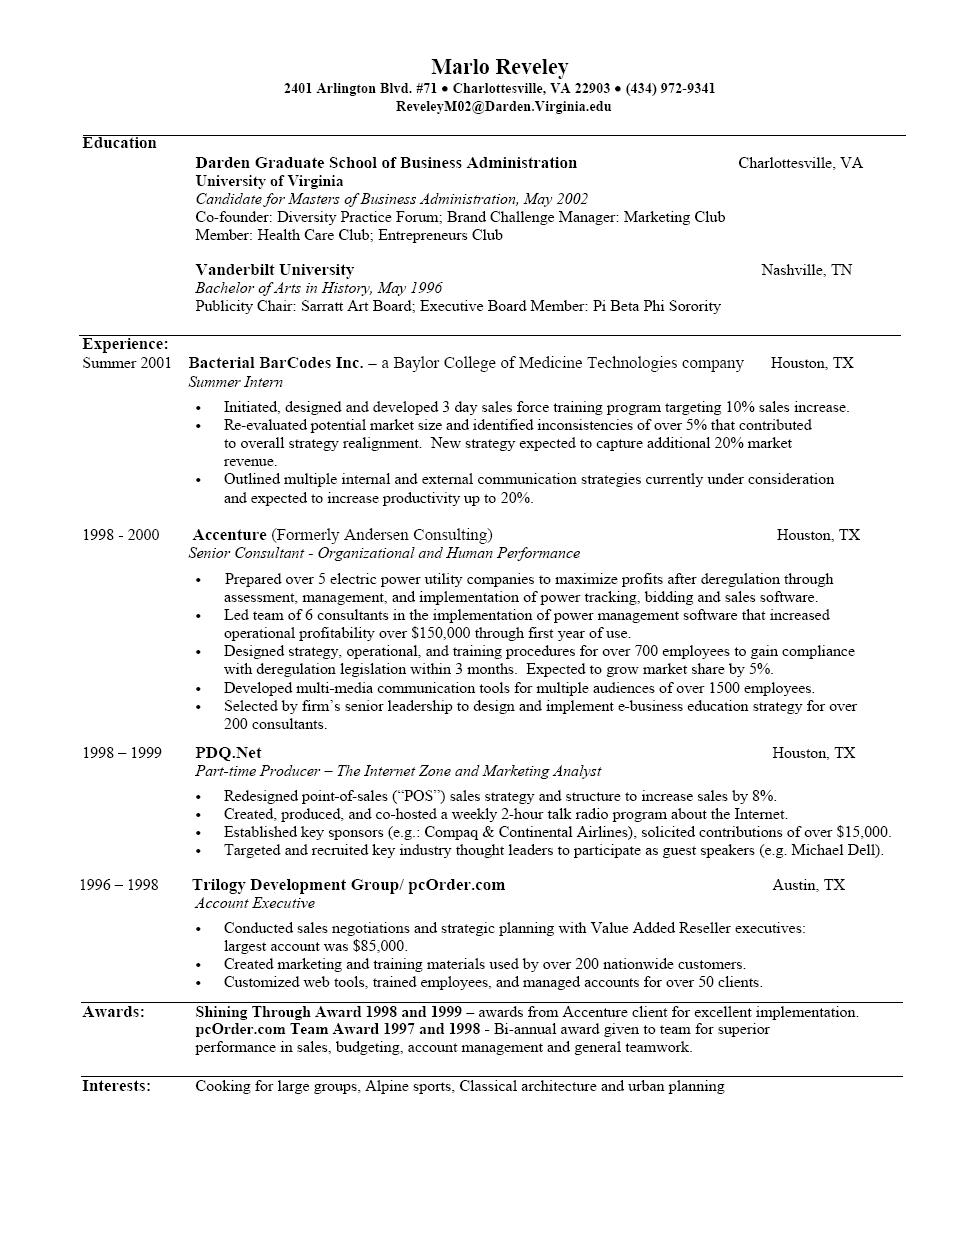 Email resume tips